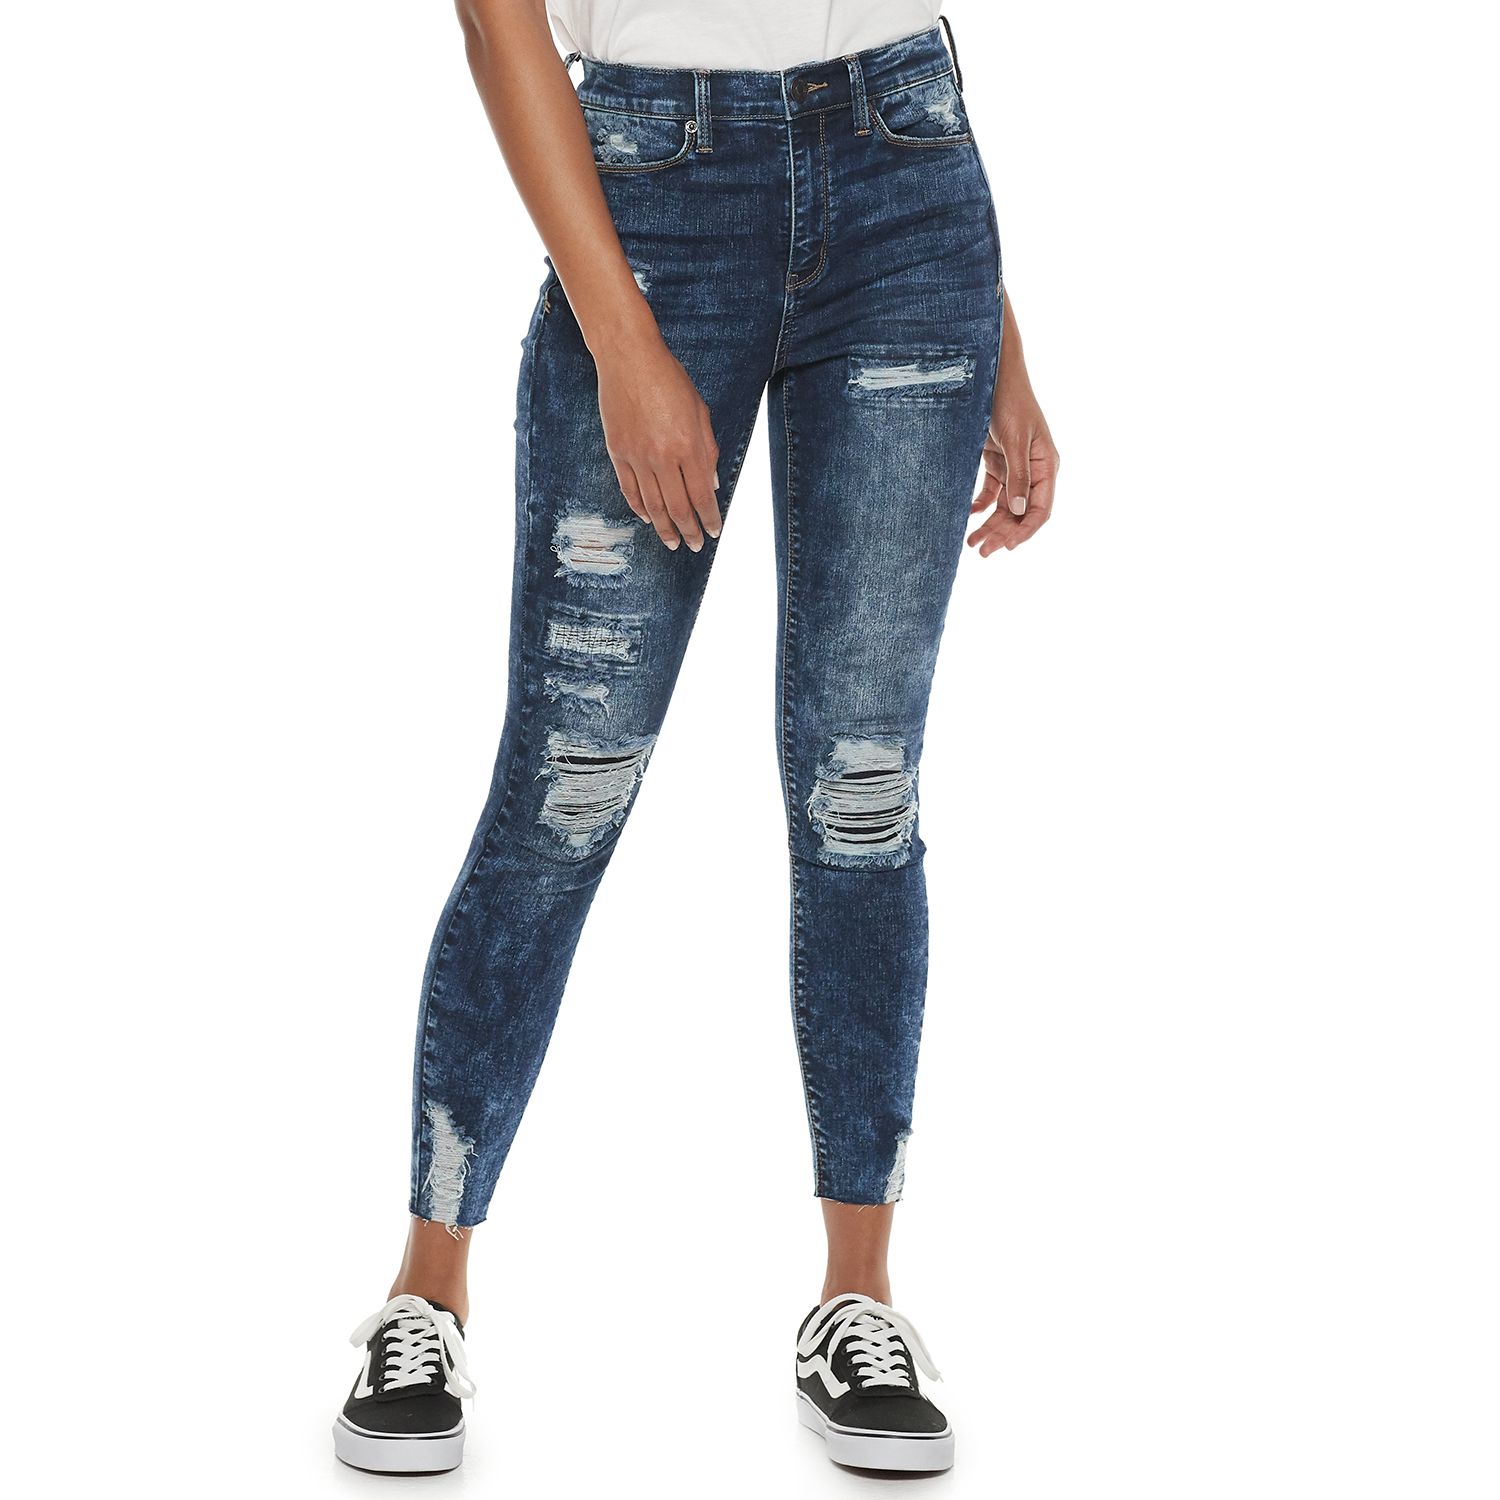 mudd high rise ankle jegging